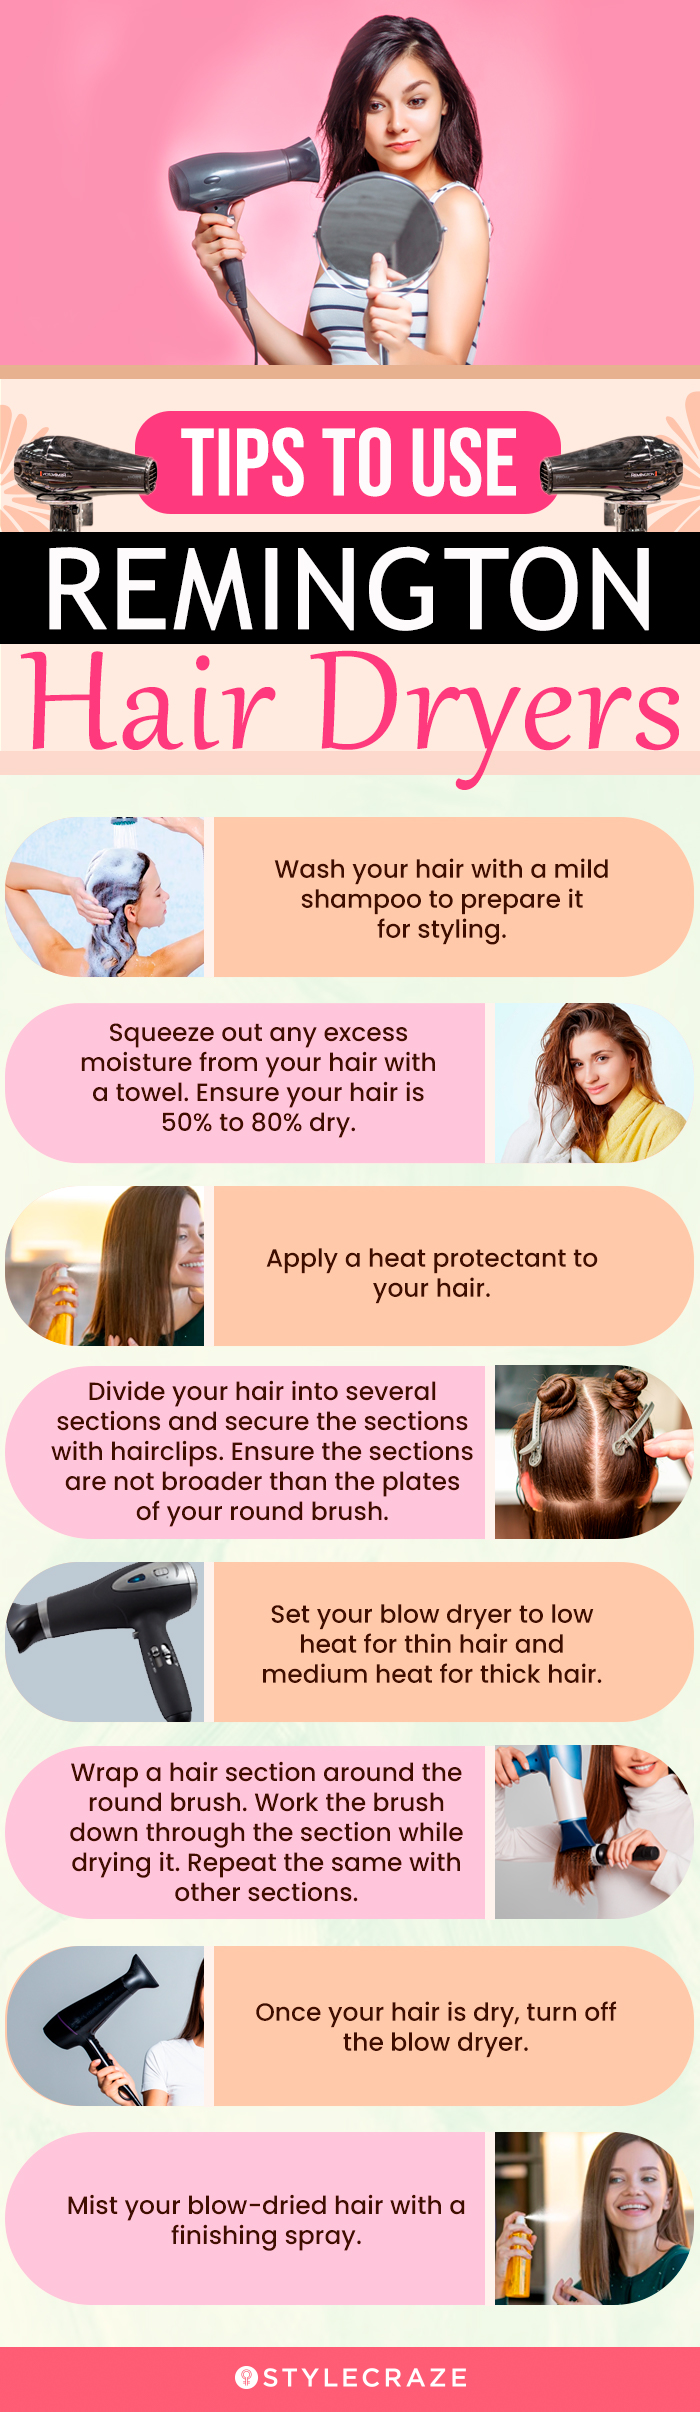 Tips To Use Remington Hair Dryers (infographic)